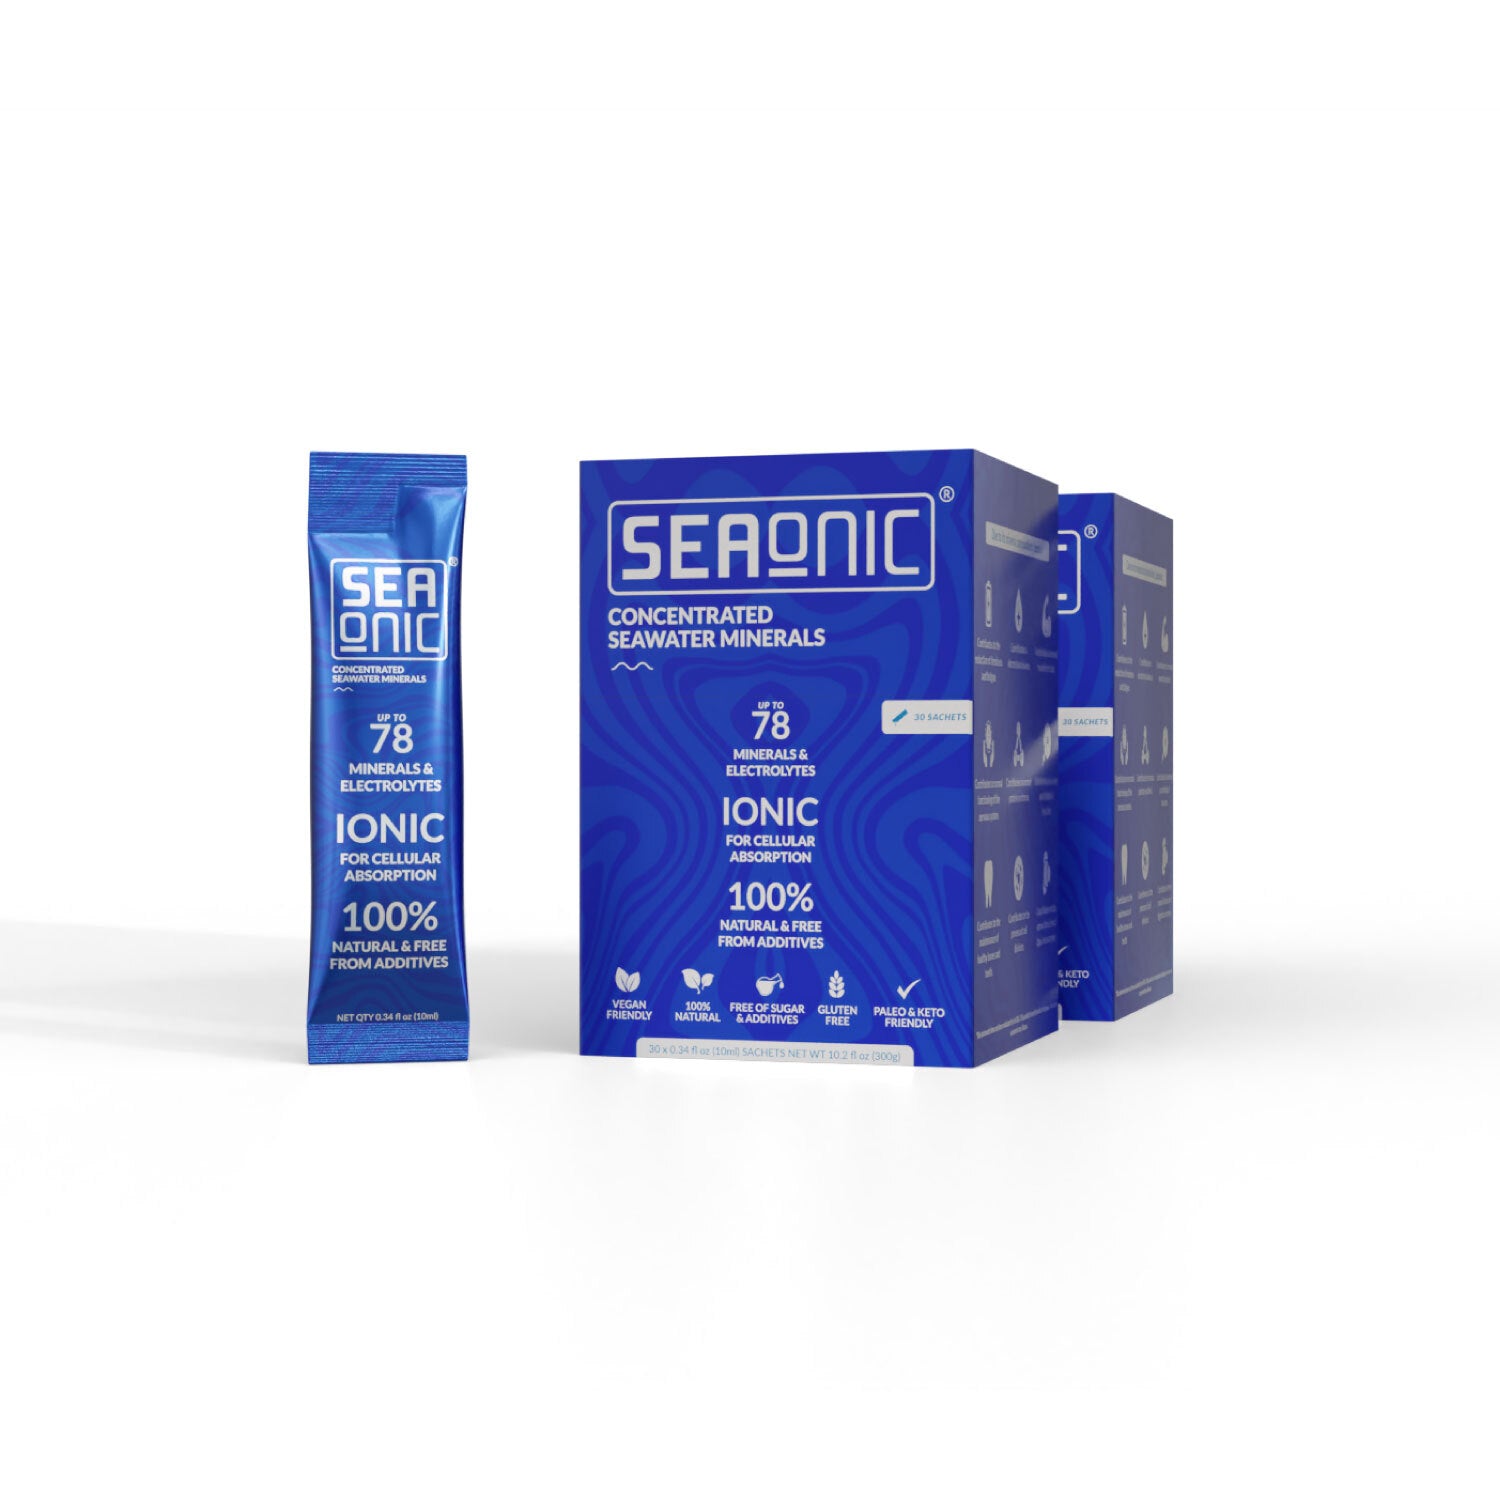 SEAONIC